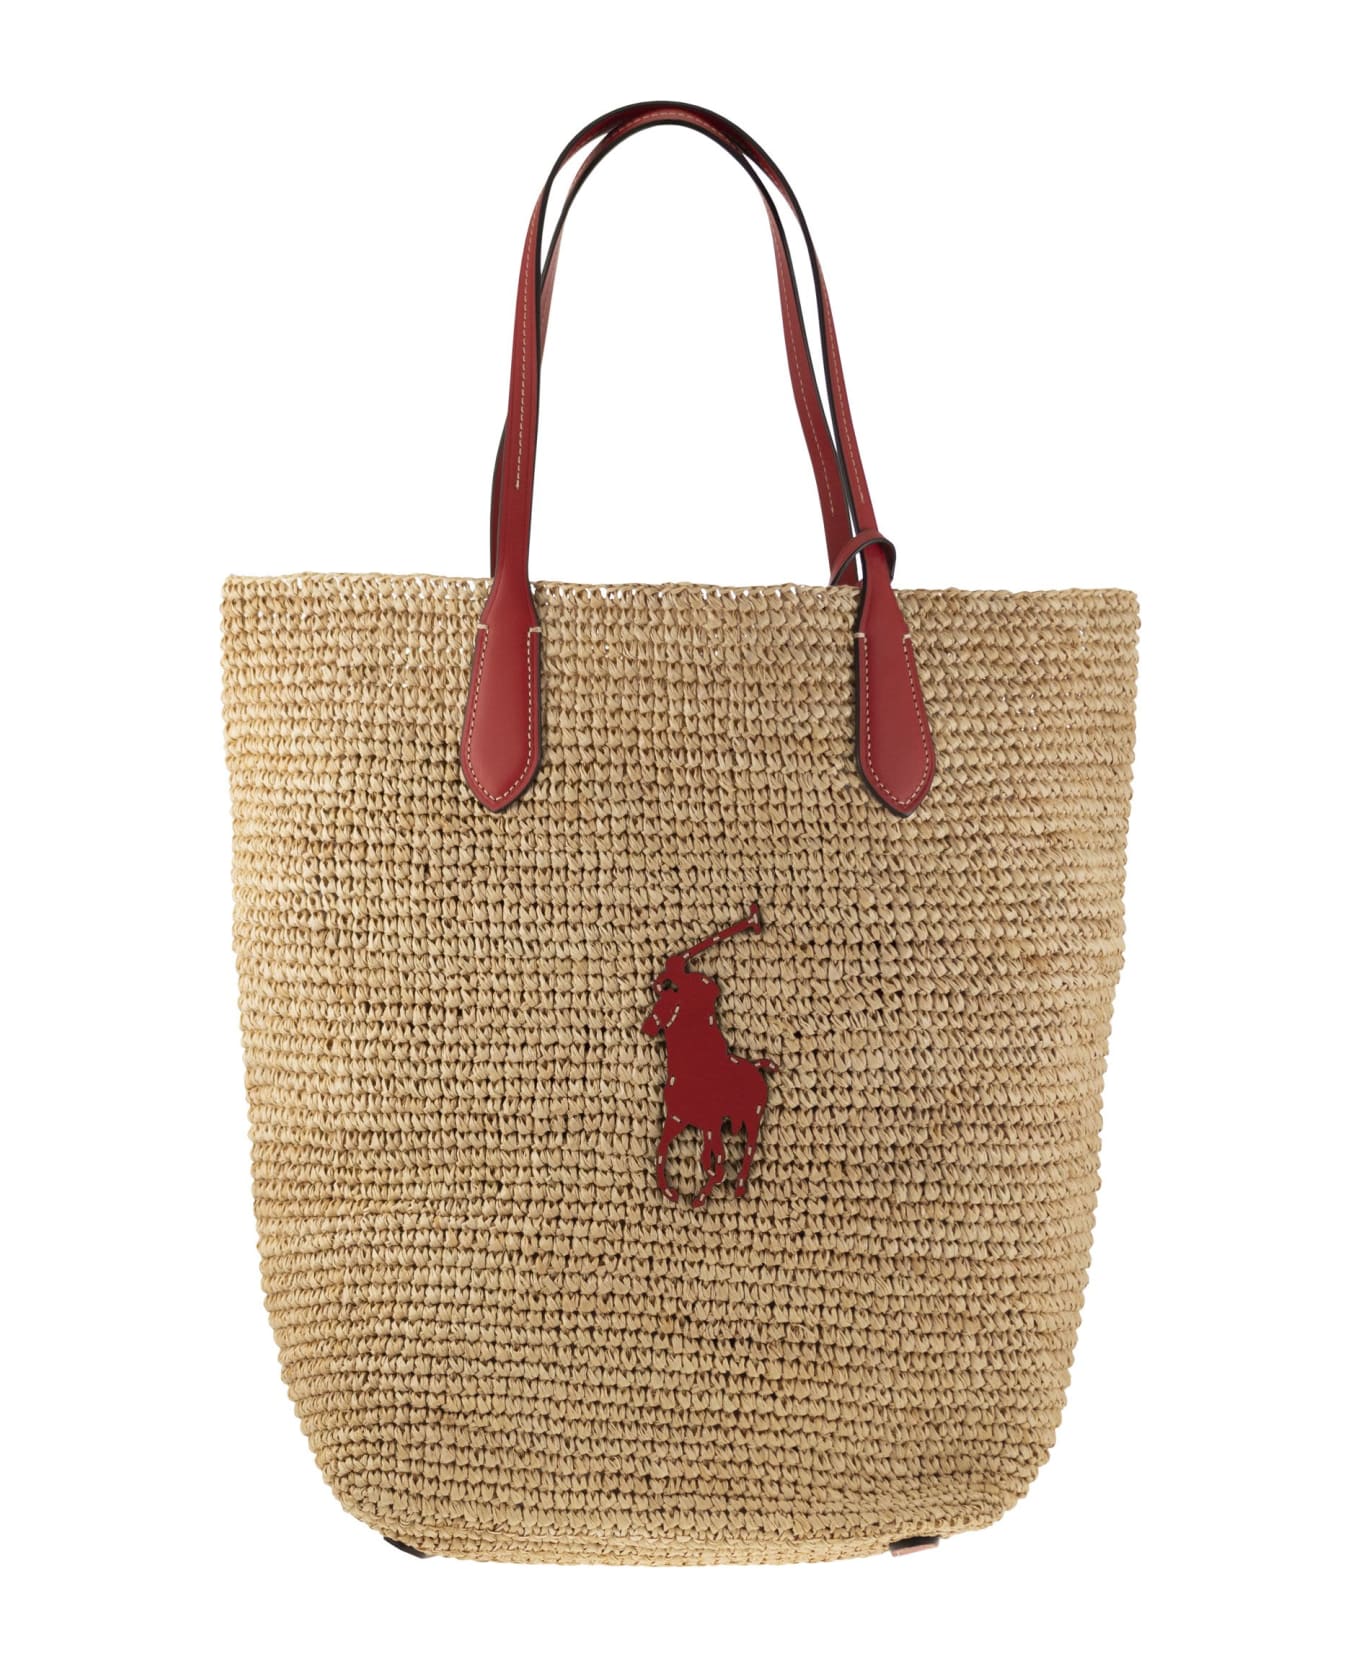 Polo Ralph Lauren Big Pony Canvas Tote - Red/natural